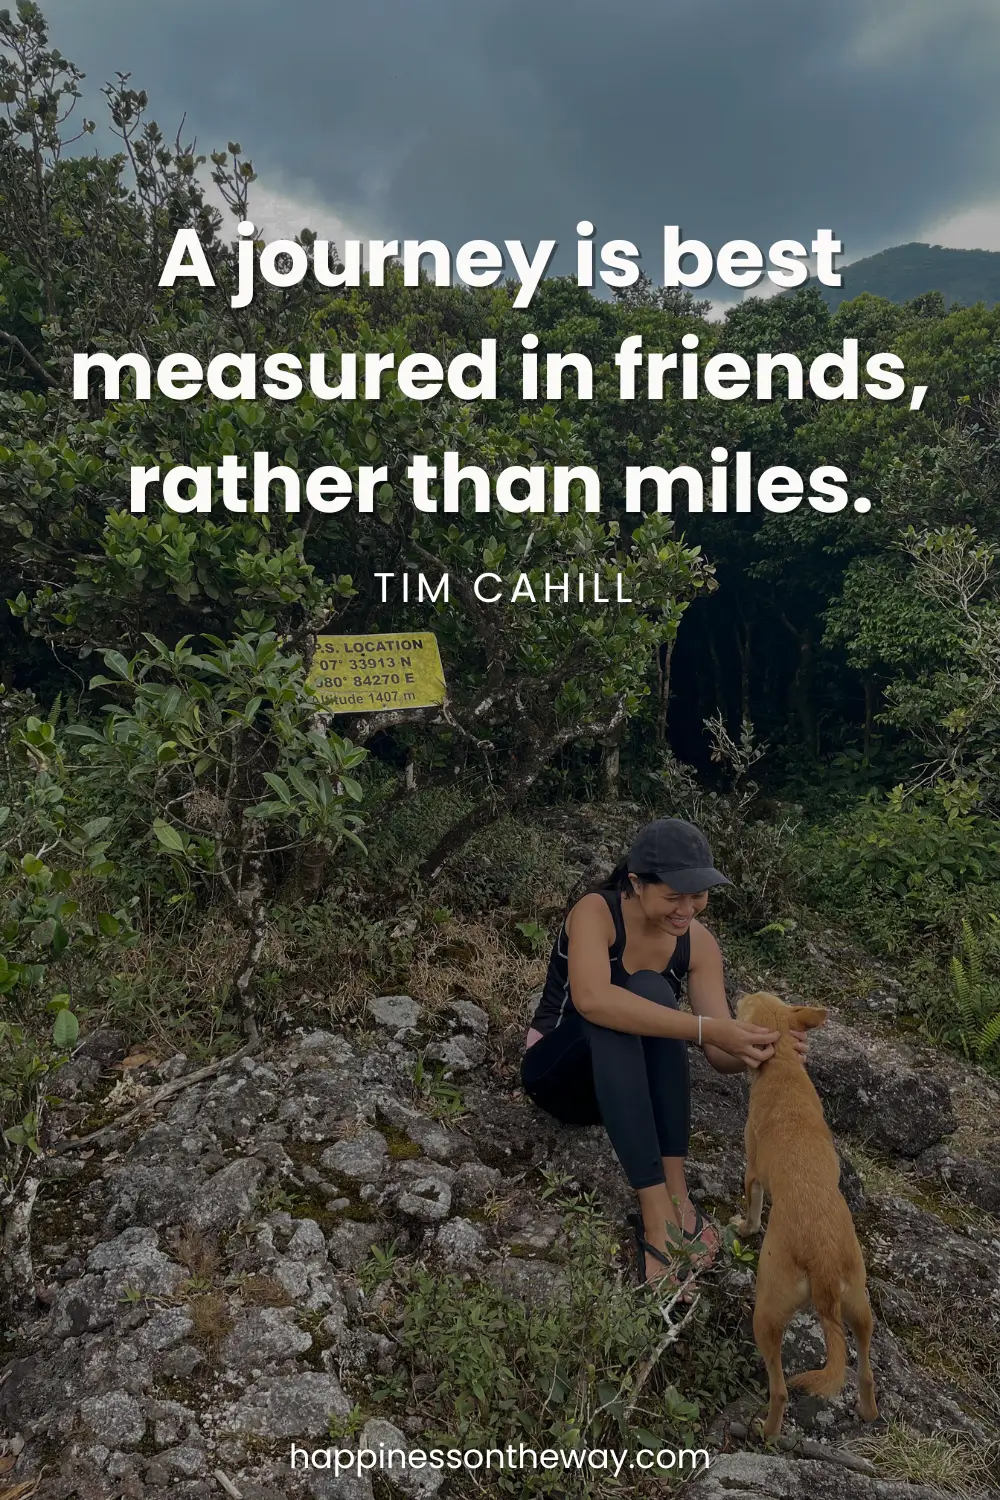 Me sitting and bonding with a dog on a rocky trail surrounded by dense greenery, with the quote 'A journey is best measured in friends, rather than miles.' by Tim Cahill